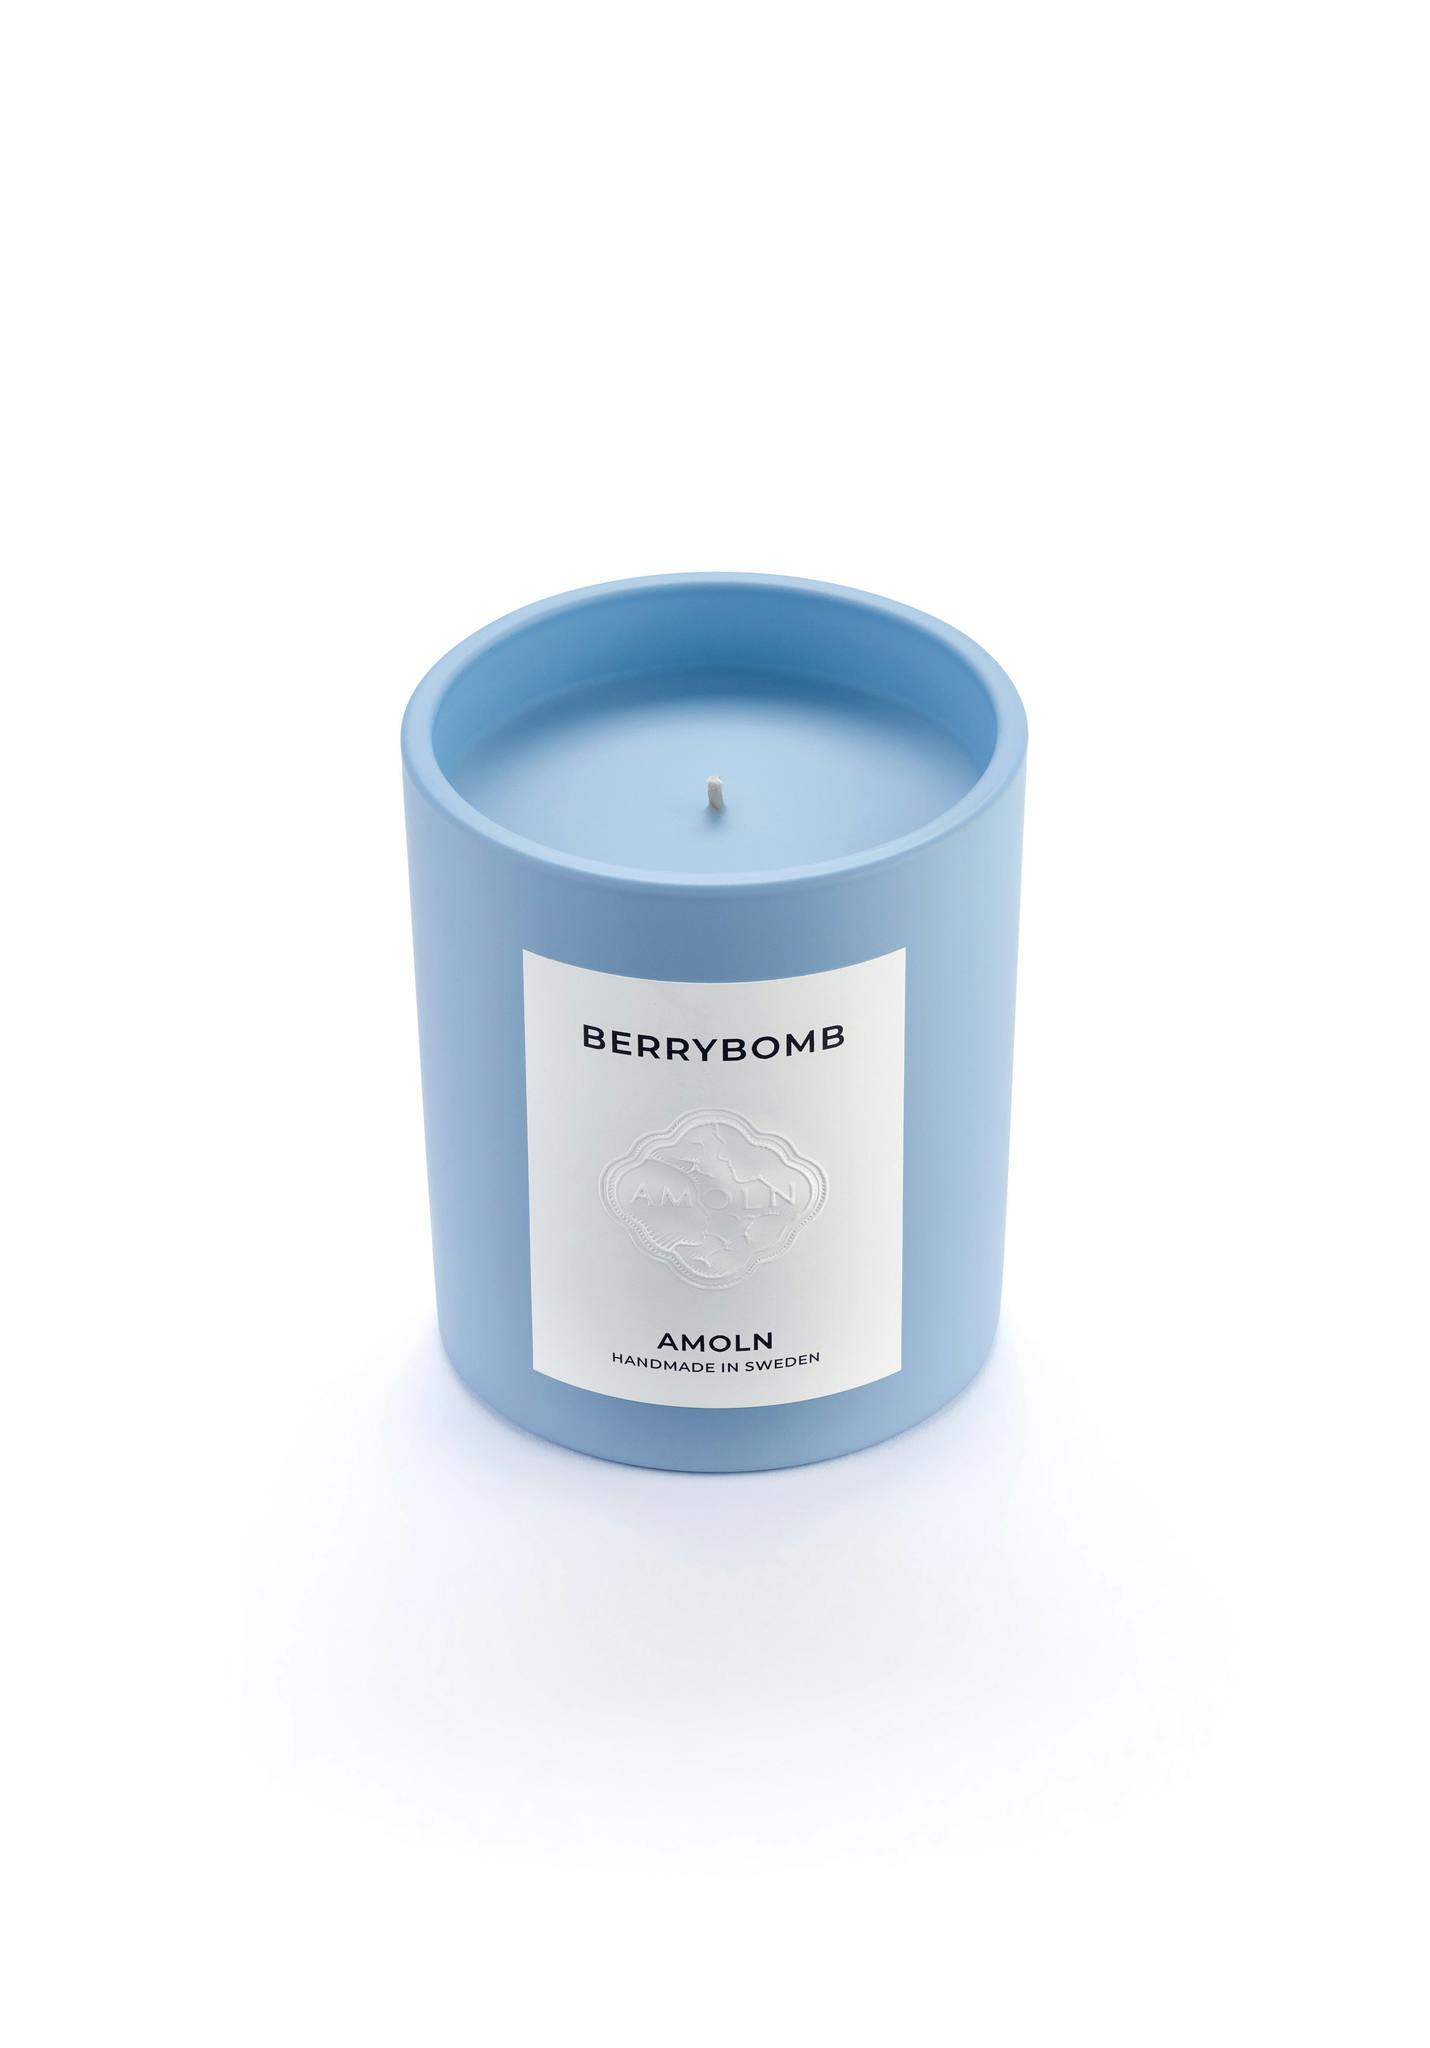 Light blue ceramic candle jar with a vegan, scented candle in blue wax for a luxurious gift. Handcrafted by artisans in Sweden. Sustainably & ethically made.